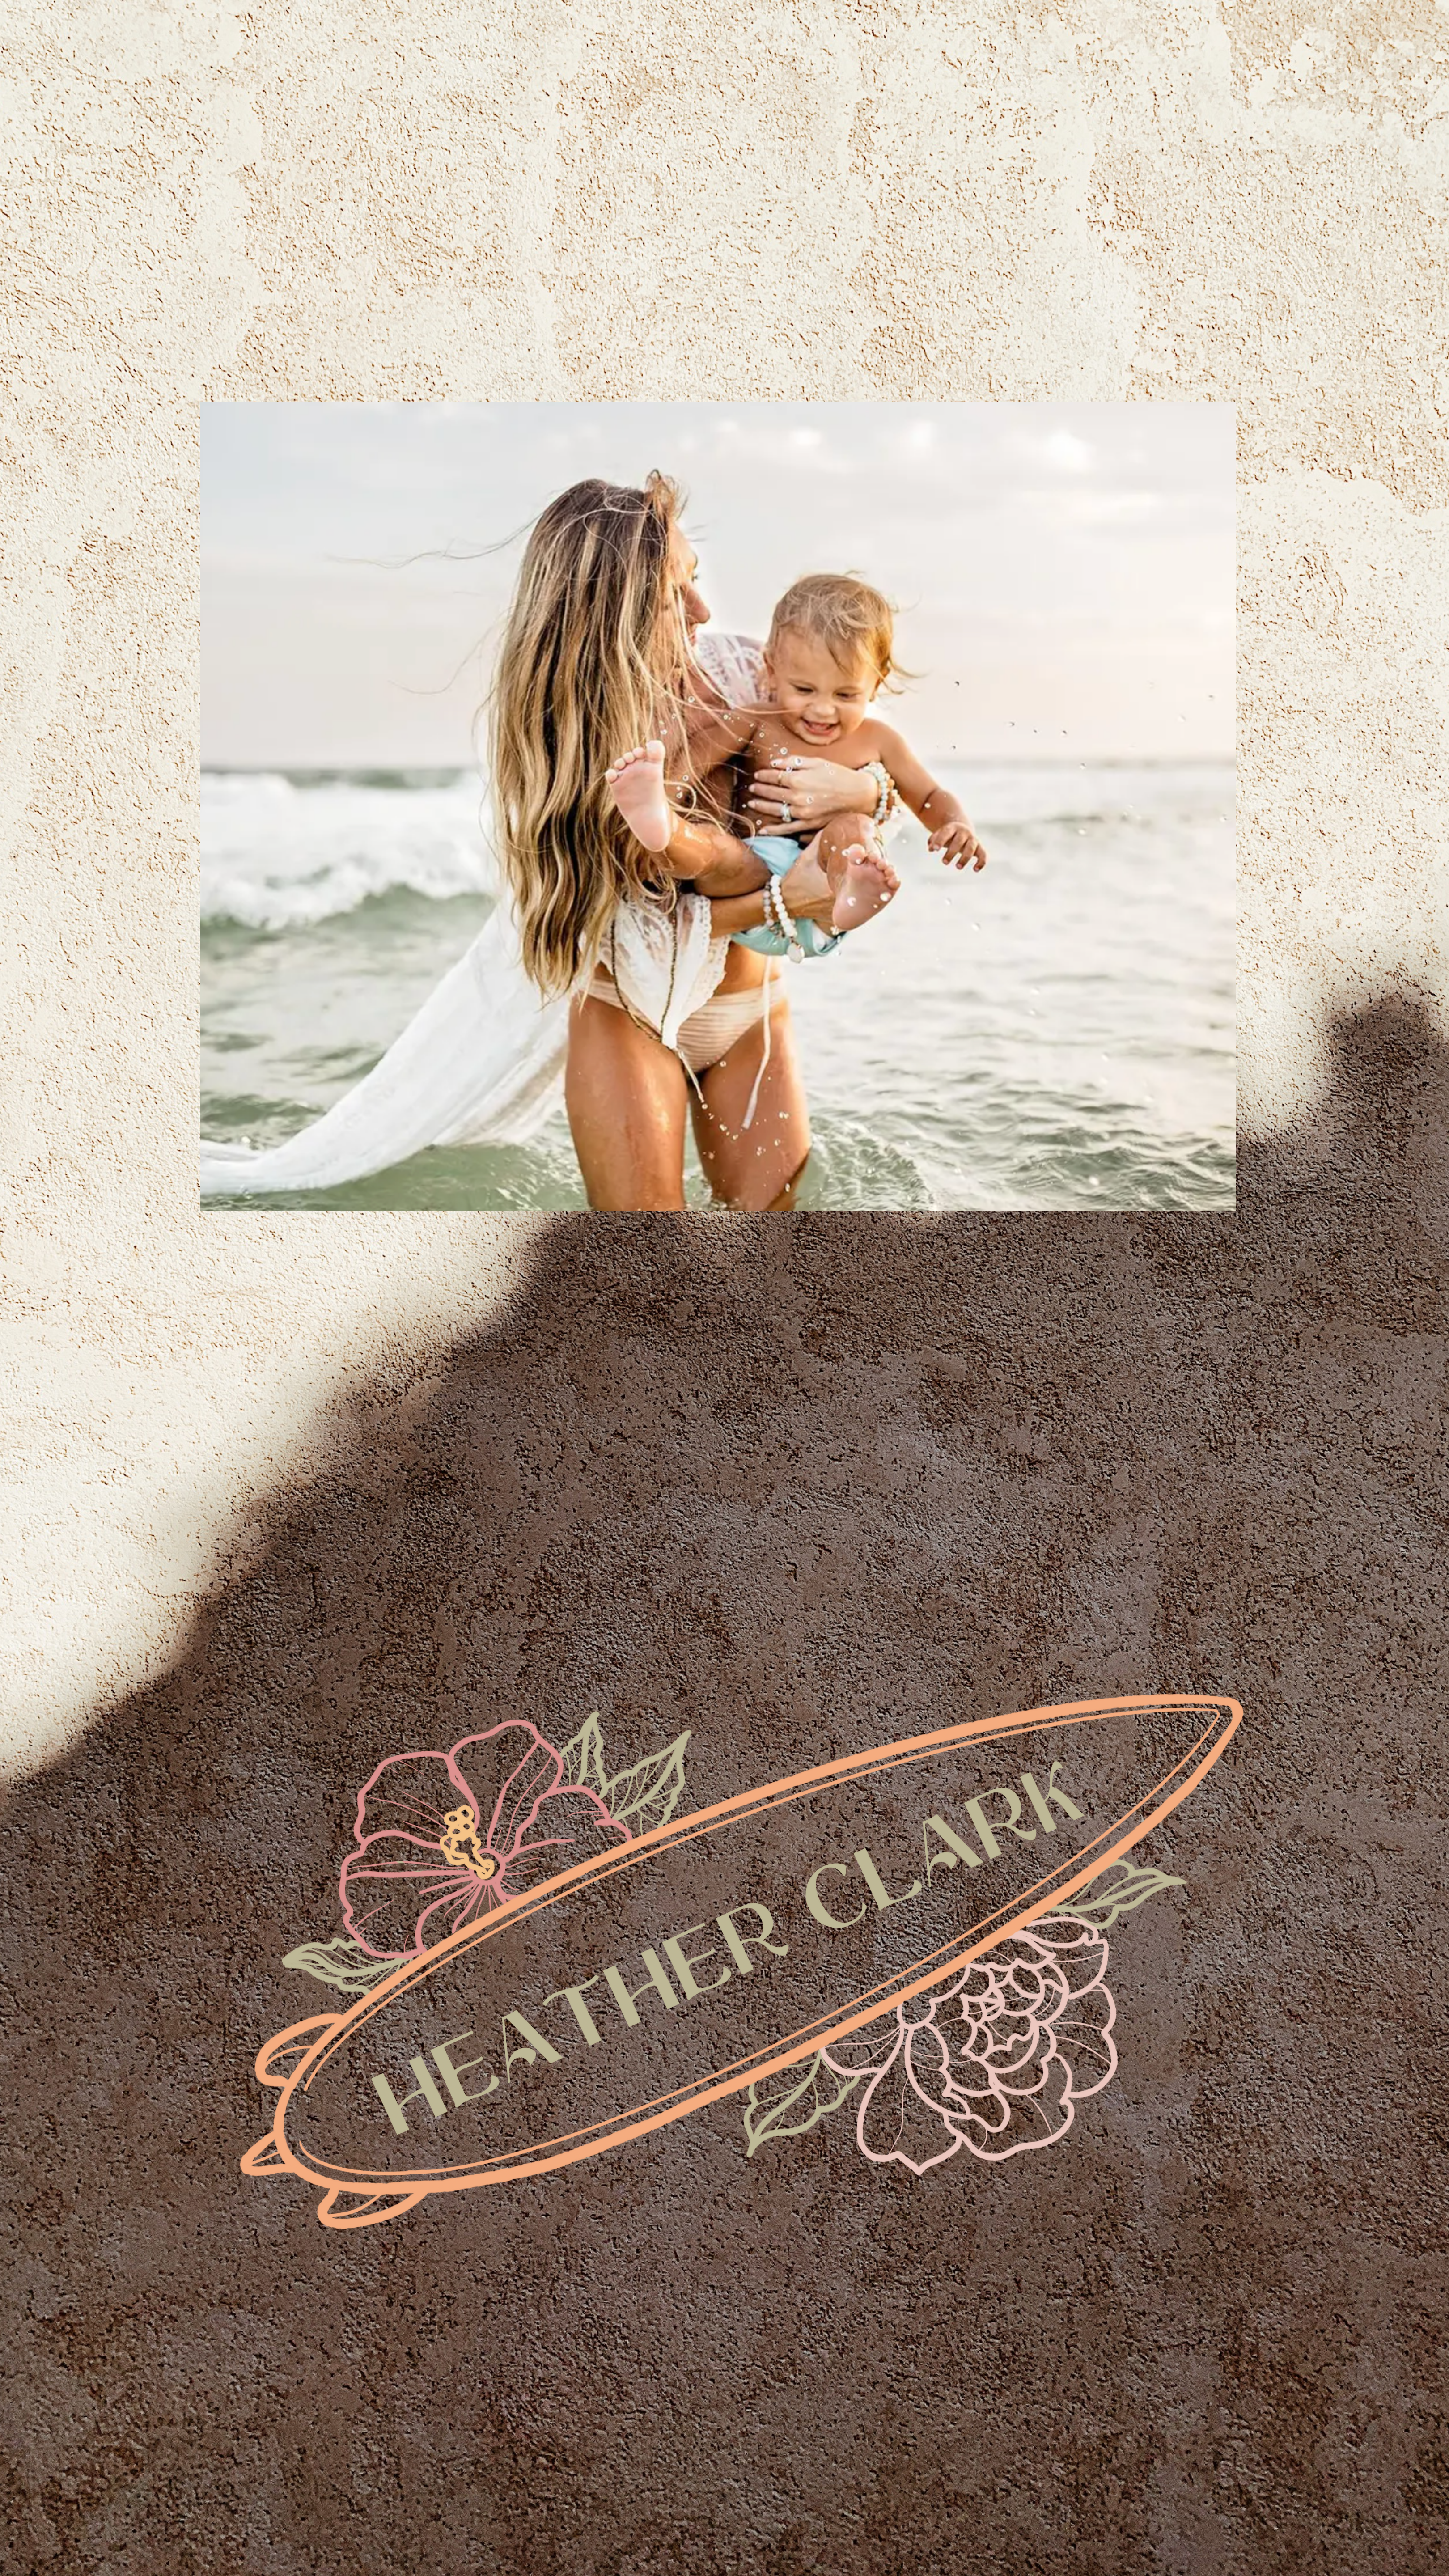 A colorful logo and brand design for a beach photographer by House of W Designs, a brand and web designer for photographers and creatives.